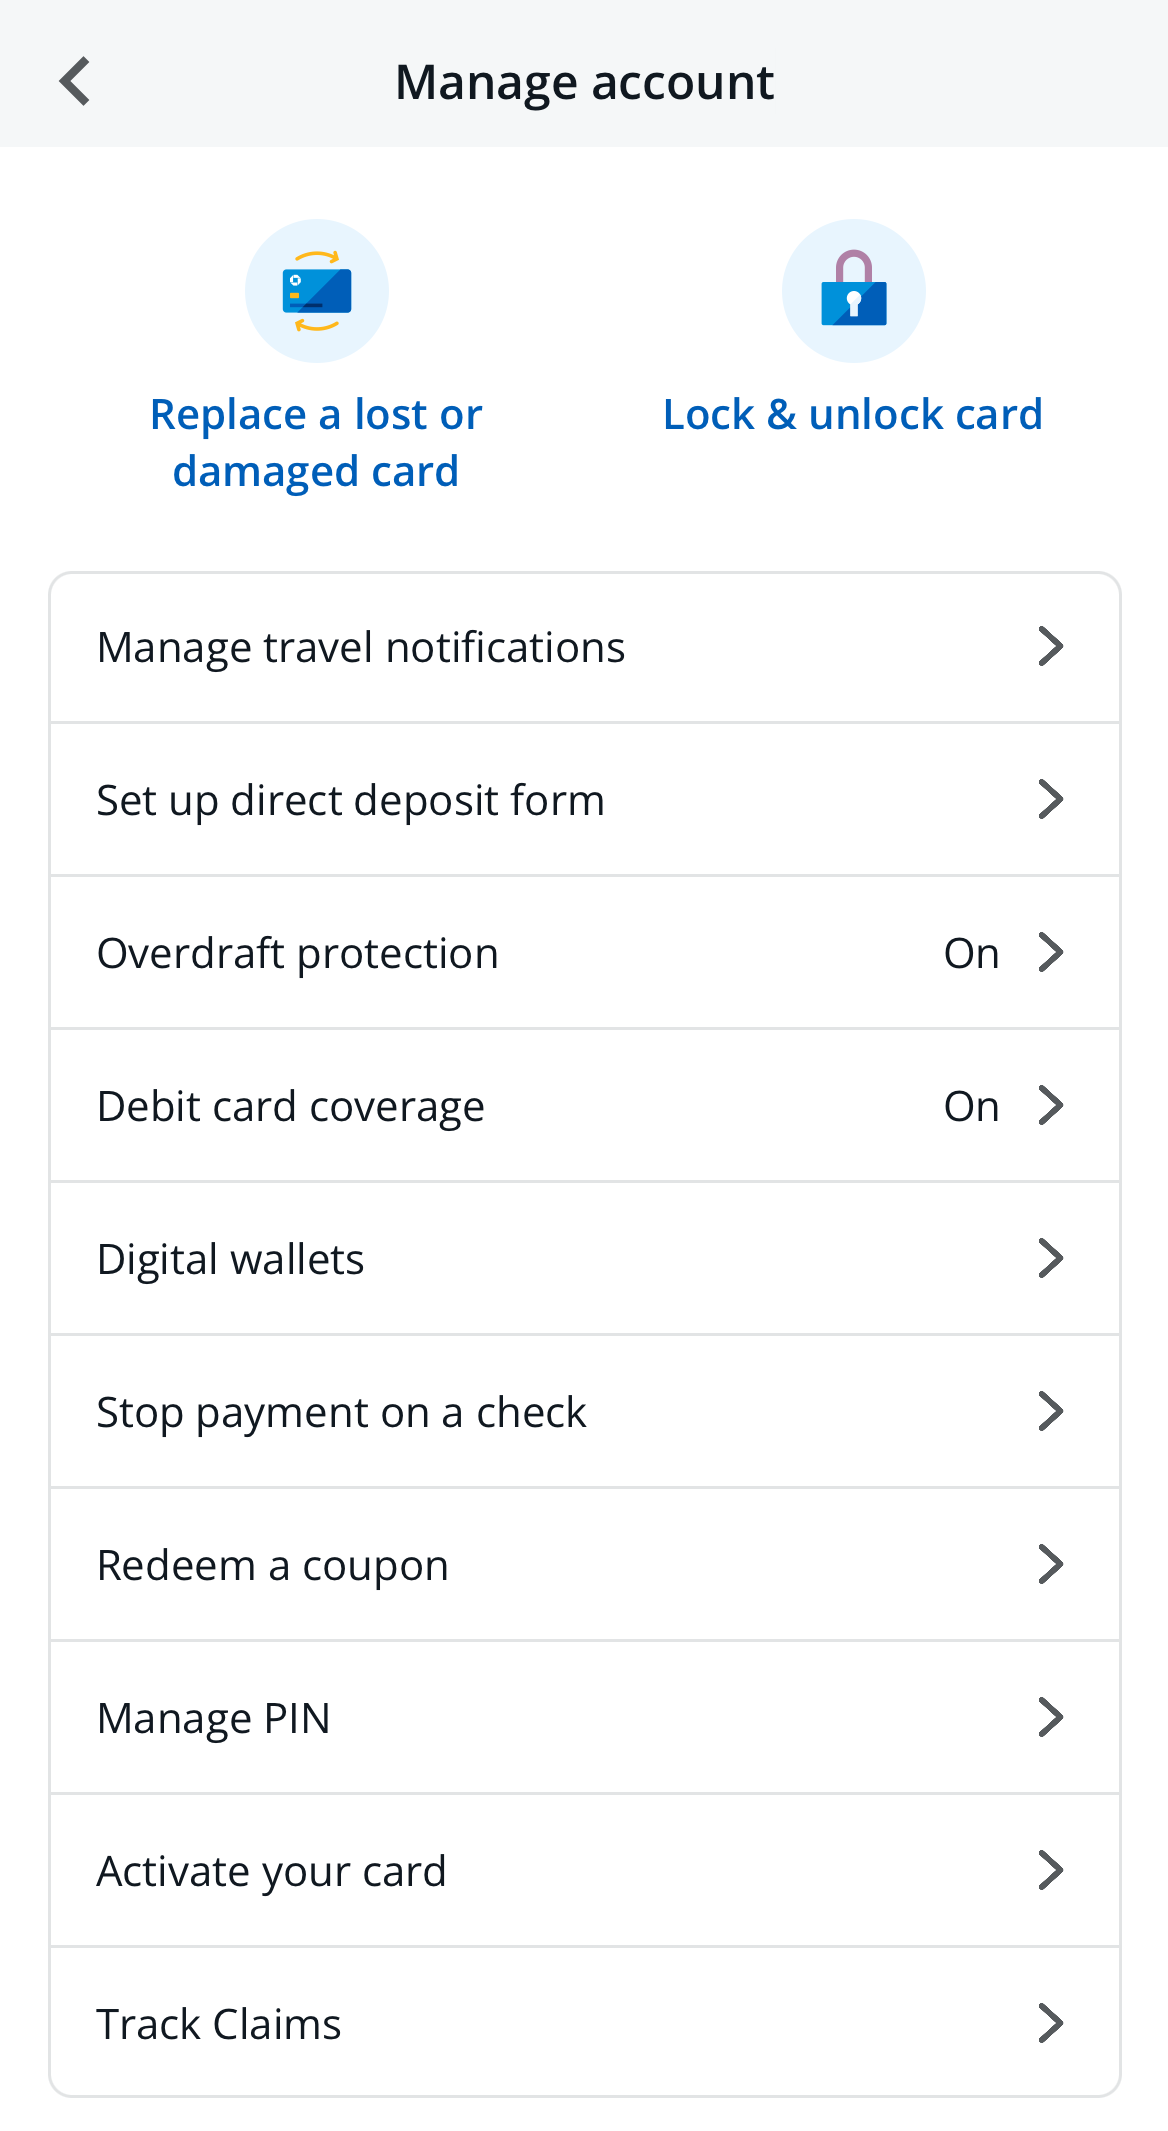 Chase manage account options